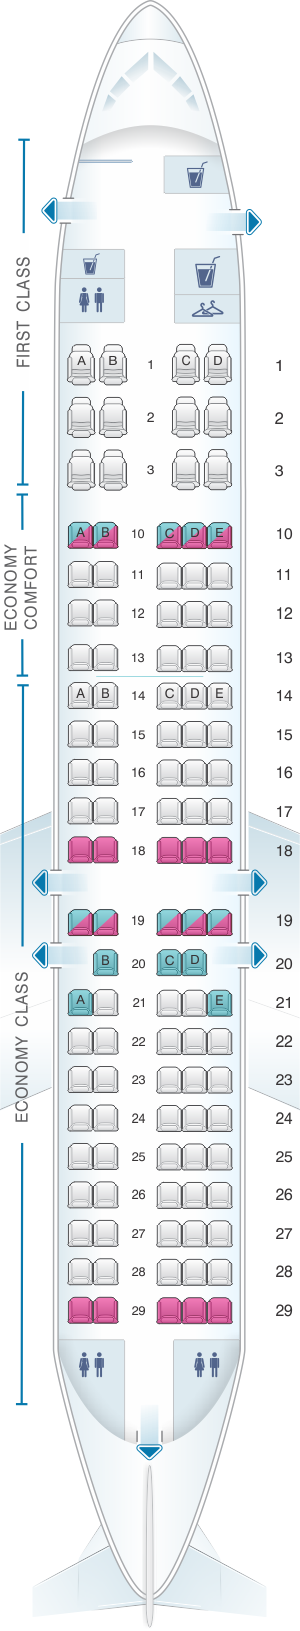 why does delta have no seat assignment